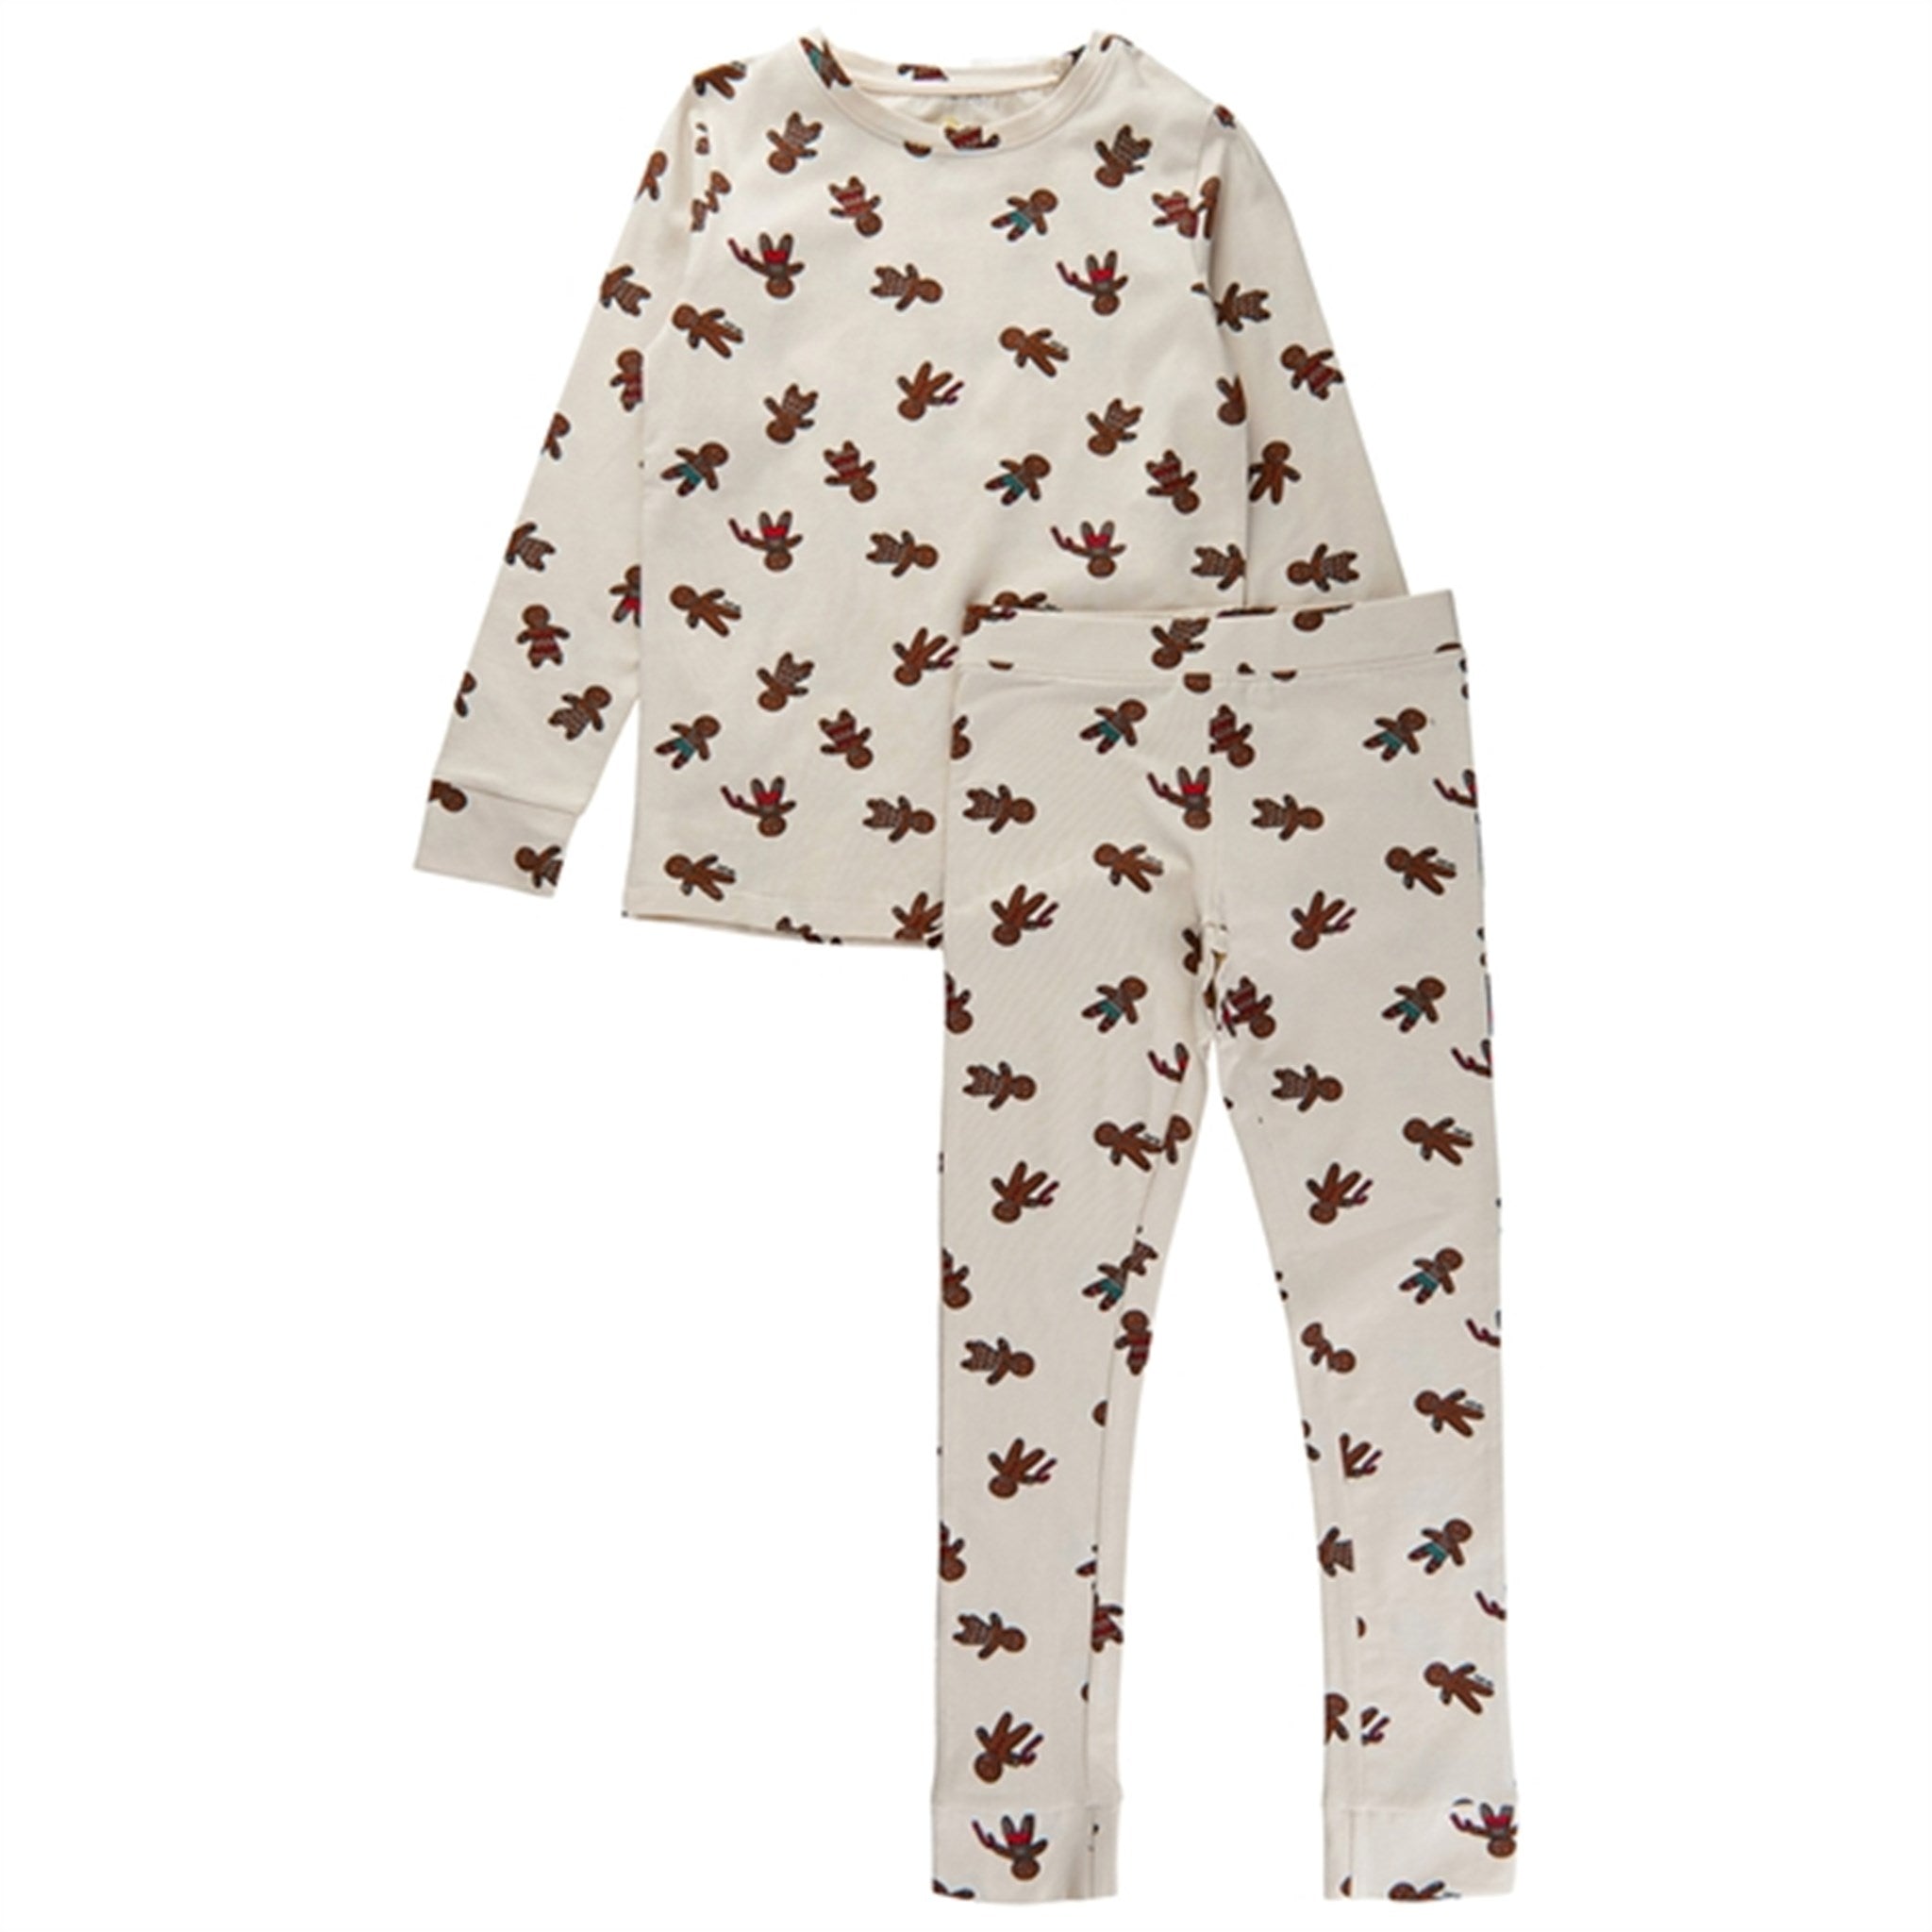 The New White Swan Ginger Aop Holiday Pyjamas Adult